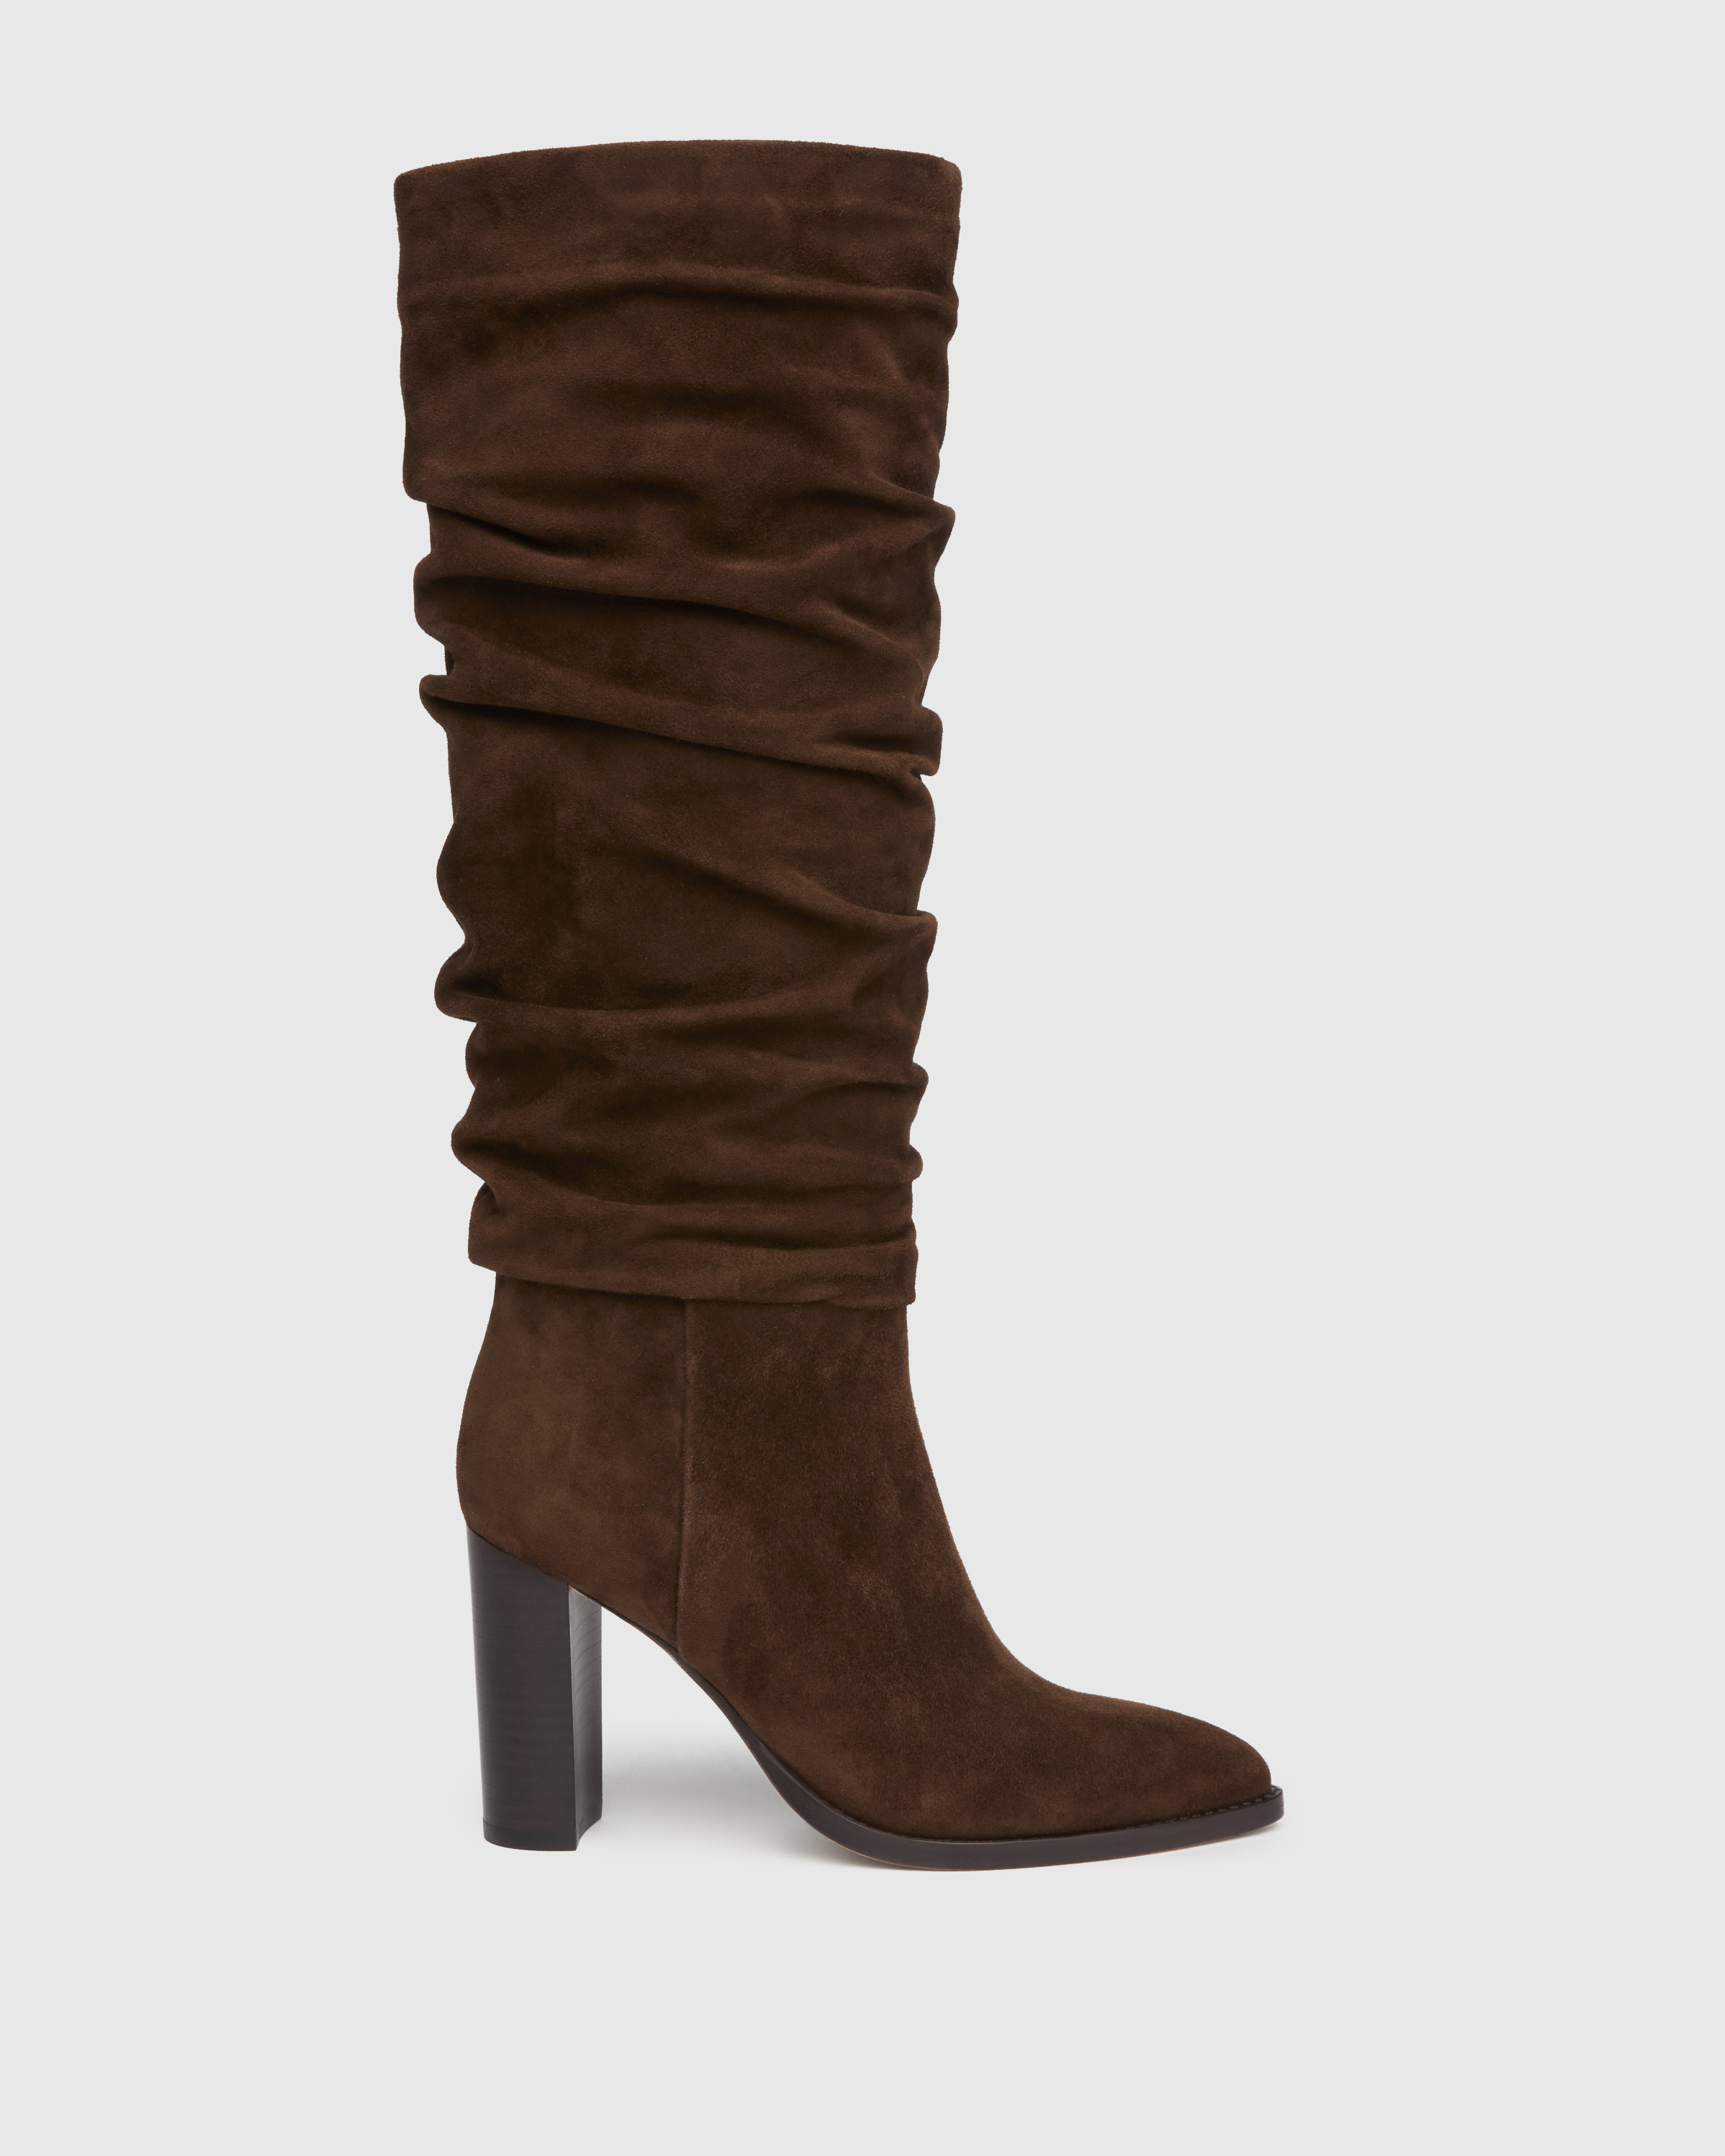 Shiloh Boot - Chocolate Suede